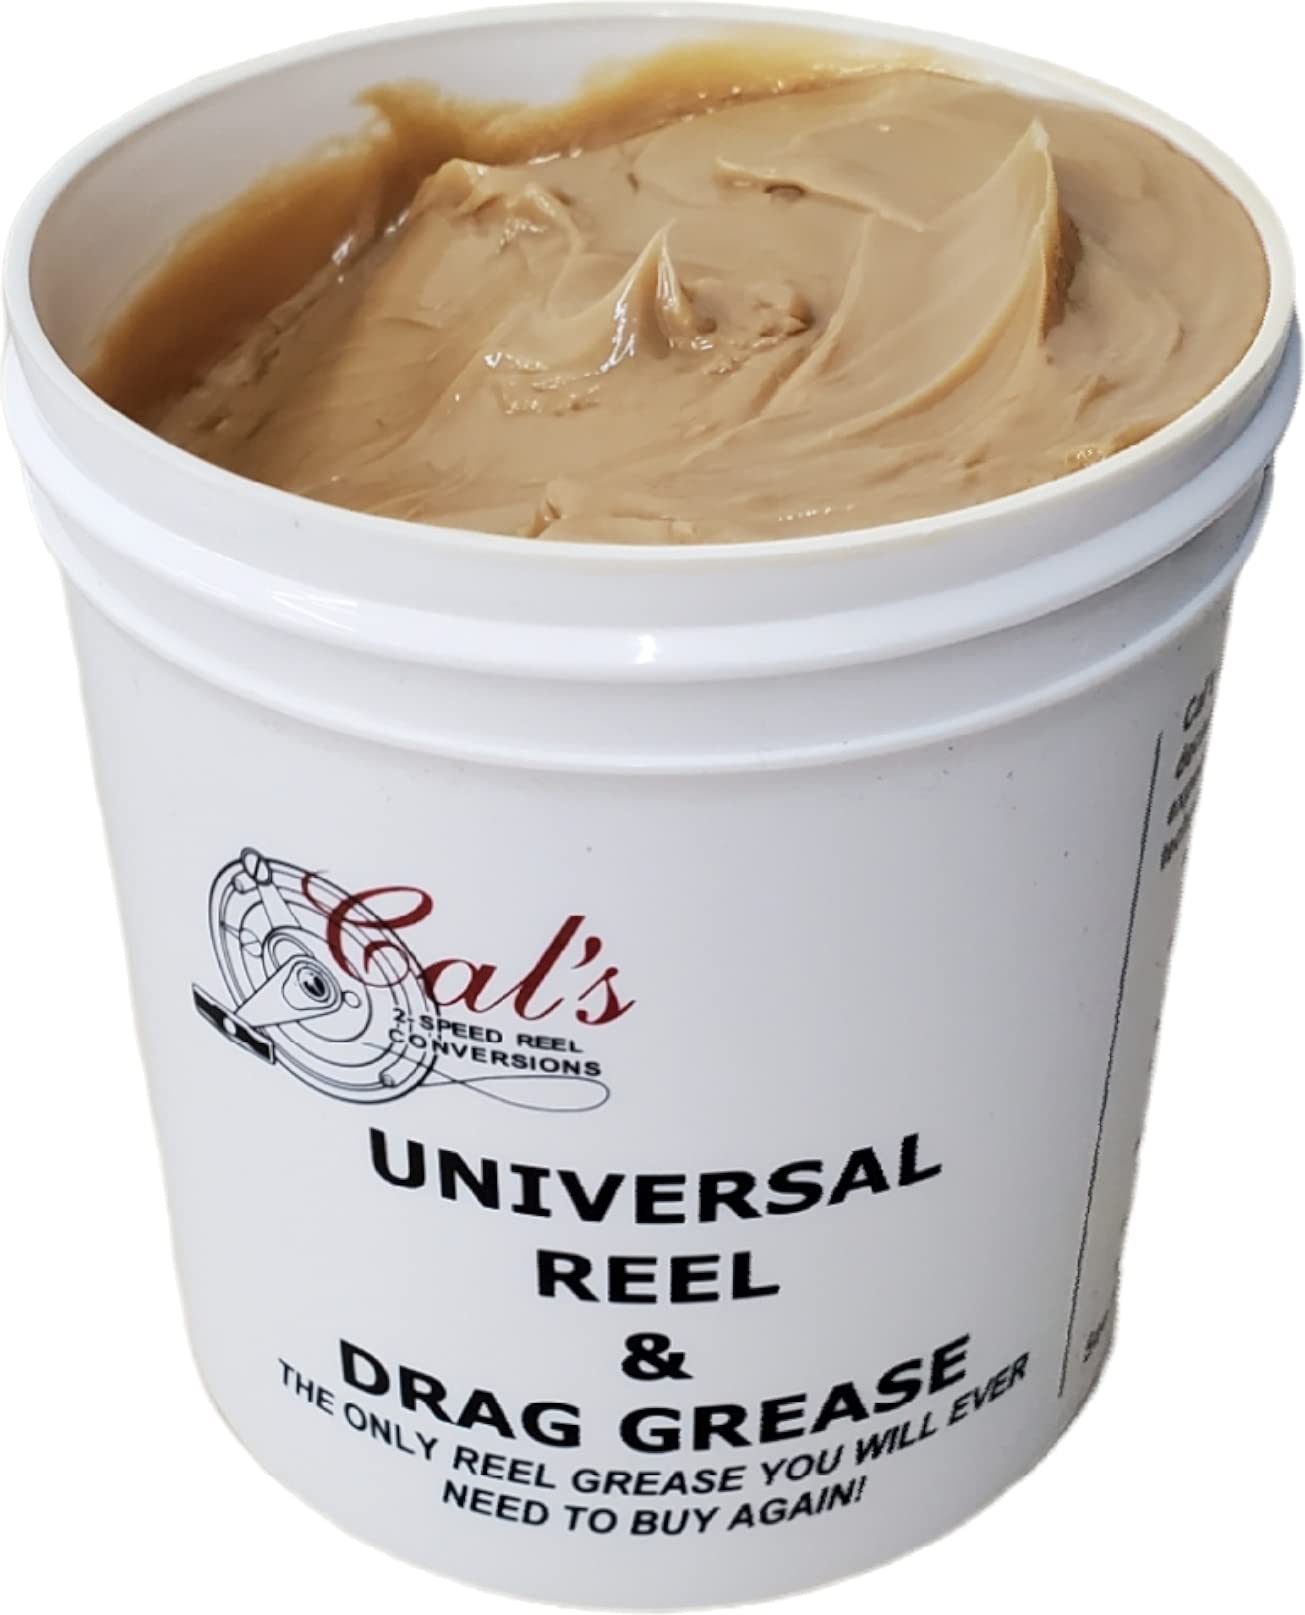 Cal's Universal Fishing Reel and Star Drag Grease Multi Use Tan 1 Ounce